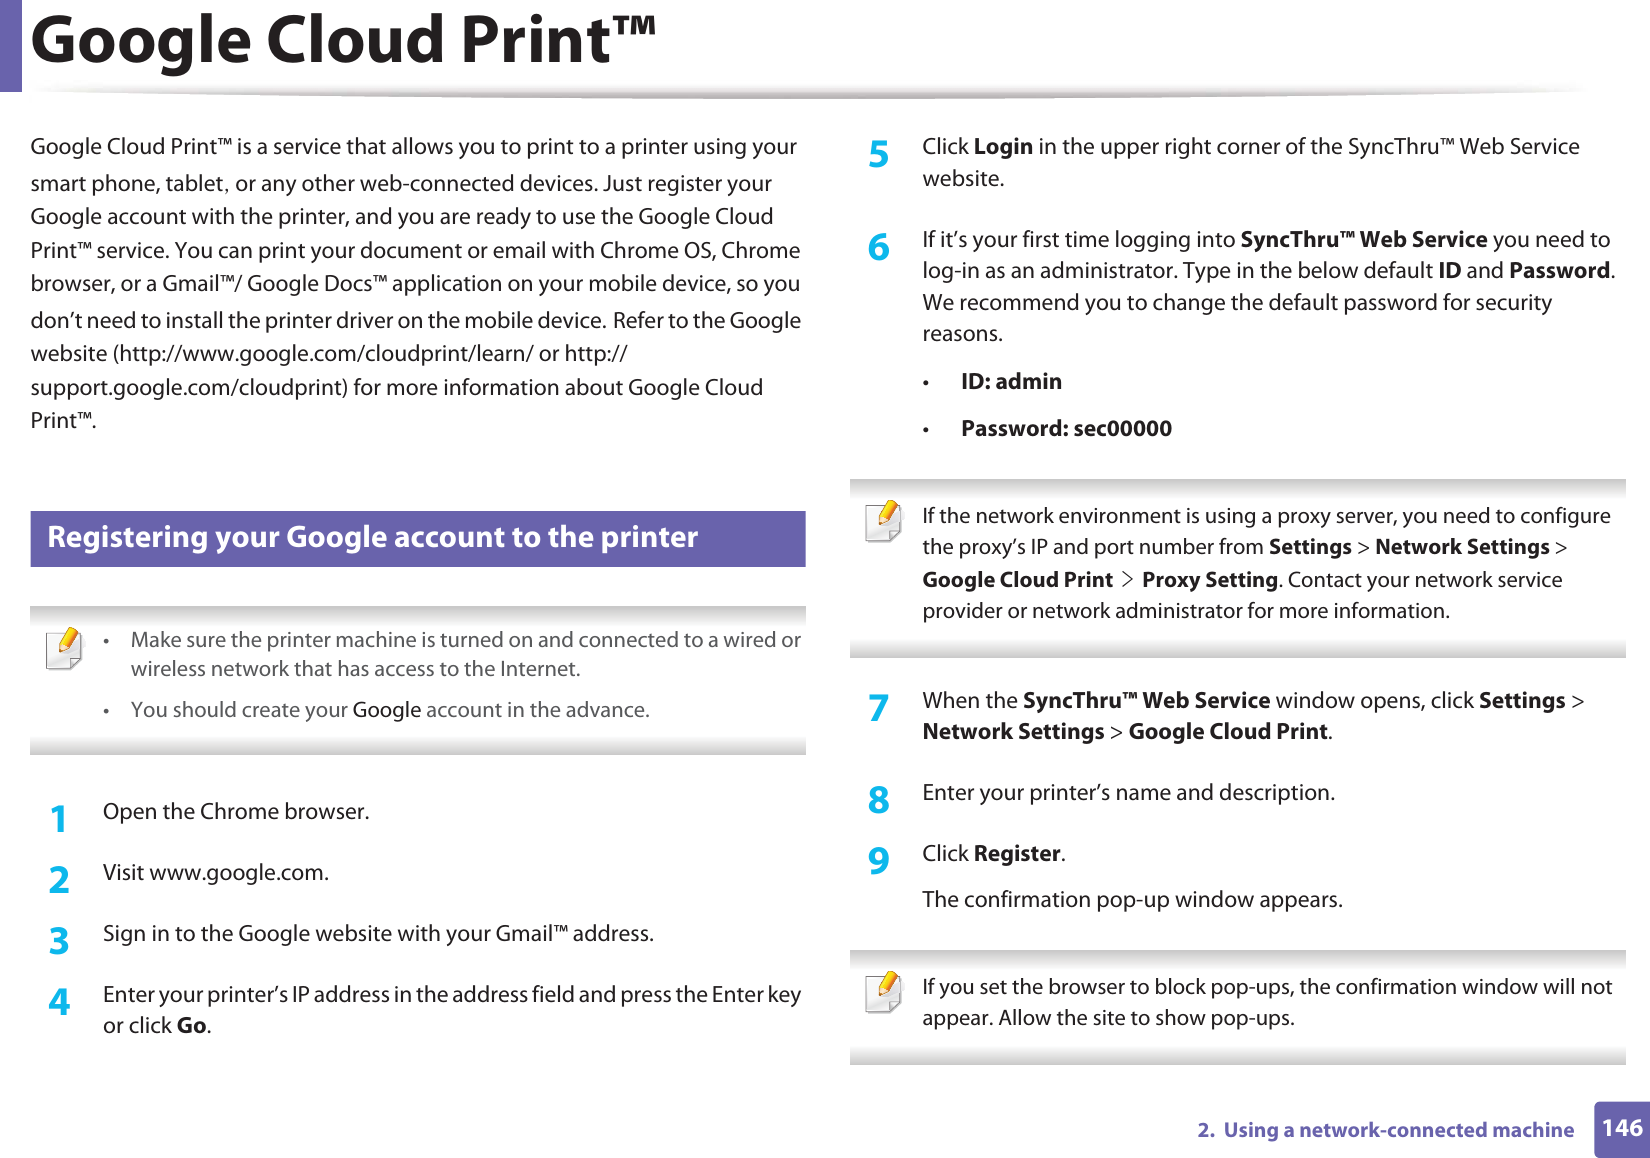 1462.  Using a network-connected machineGoogle Cloud Print™Google Cloud Print™ is a service that allows you to print to a printer using your smart phone, tabletS or any other web-connected devices. Just register your Google account with the printer, and you are ready to use the Google Cloud Print™ service. You can print your document or email with Chrome OS, Chrome browser, or a Gmail™/ Google Docs™ application on your mobile device, so you don’t need to install the printer driver on the mobile device.GRefer to the Google website (http://www.google.com/cloudprint/learn/ or http://support.google.com/cloudprint) for more information about Google Cloud Print™.25 Registering your Google account to the printer • Make sure the printer machine is turned on and connected to a wired or wireless network that has access to the Internet. • You should create your Google account in the advance.  1Open the Chrome browser.2  Visit www.google.com.3  Sign in to the Google website with your Gmail™ address.4  Enter your printer’s IP address in the address field and press the Enter key or click Go.5  Click Login in the upper right corner of the SyncThru™ Web Service website.6  If it’s your first time logging into SyncThru™ Web Service you need to log-in as an administrator. Type in the below default ID and Password. We recommend you to change the default password for security reasons.•ID: admin •Password: sec00000  If the network environment is using a proxy server, you need to configure the proxy’s IP and port number from Settings &gt; Network Settings &gt; Google Cloud PrintGeGProxy Setting. Contact your network service provider or network administrator for more information.  7  When the SyncThru™ Web Service window opens, click Settings &gt; Network Settings &gt; Google Cloud Print.8  Enter your printer’s name and description.9  Click Register.The confirmation pop-up window appears. If you set the browser to block pop-ups, the confirmation window will not appear. Allow the site to show pop-ups.  